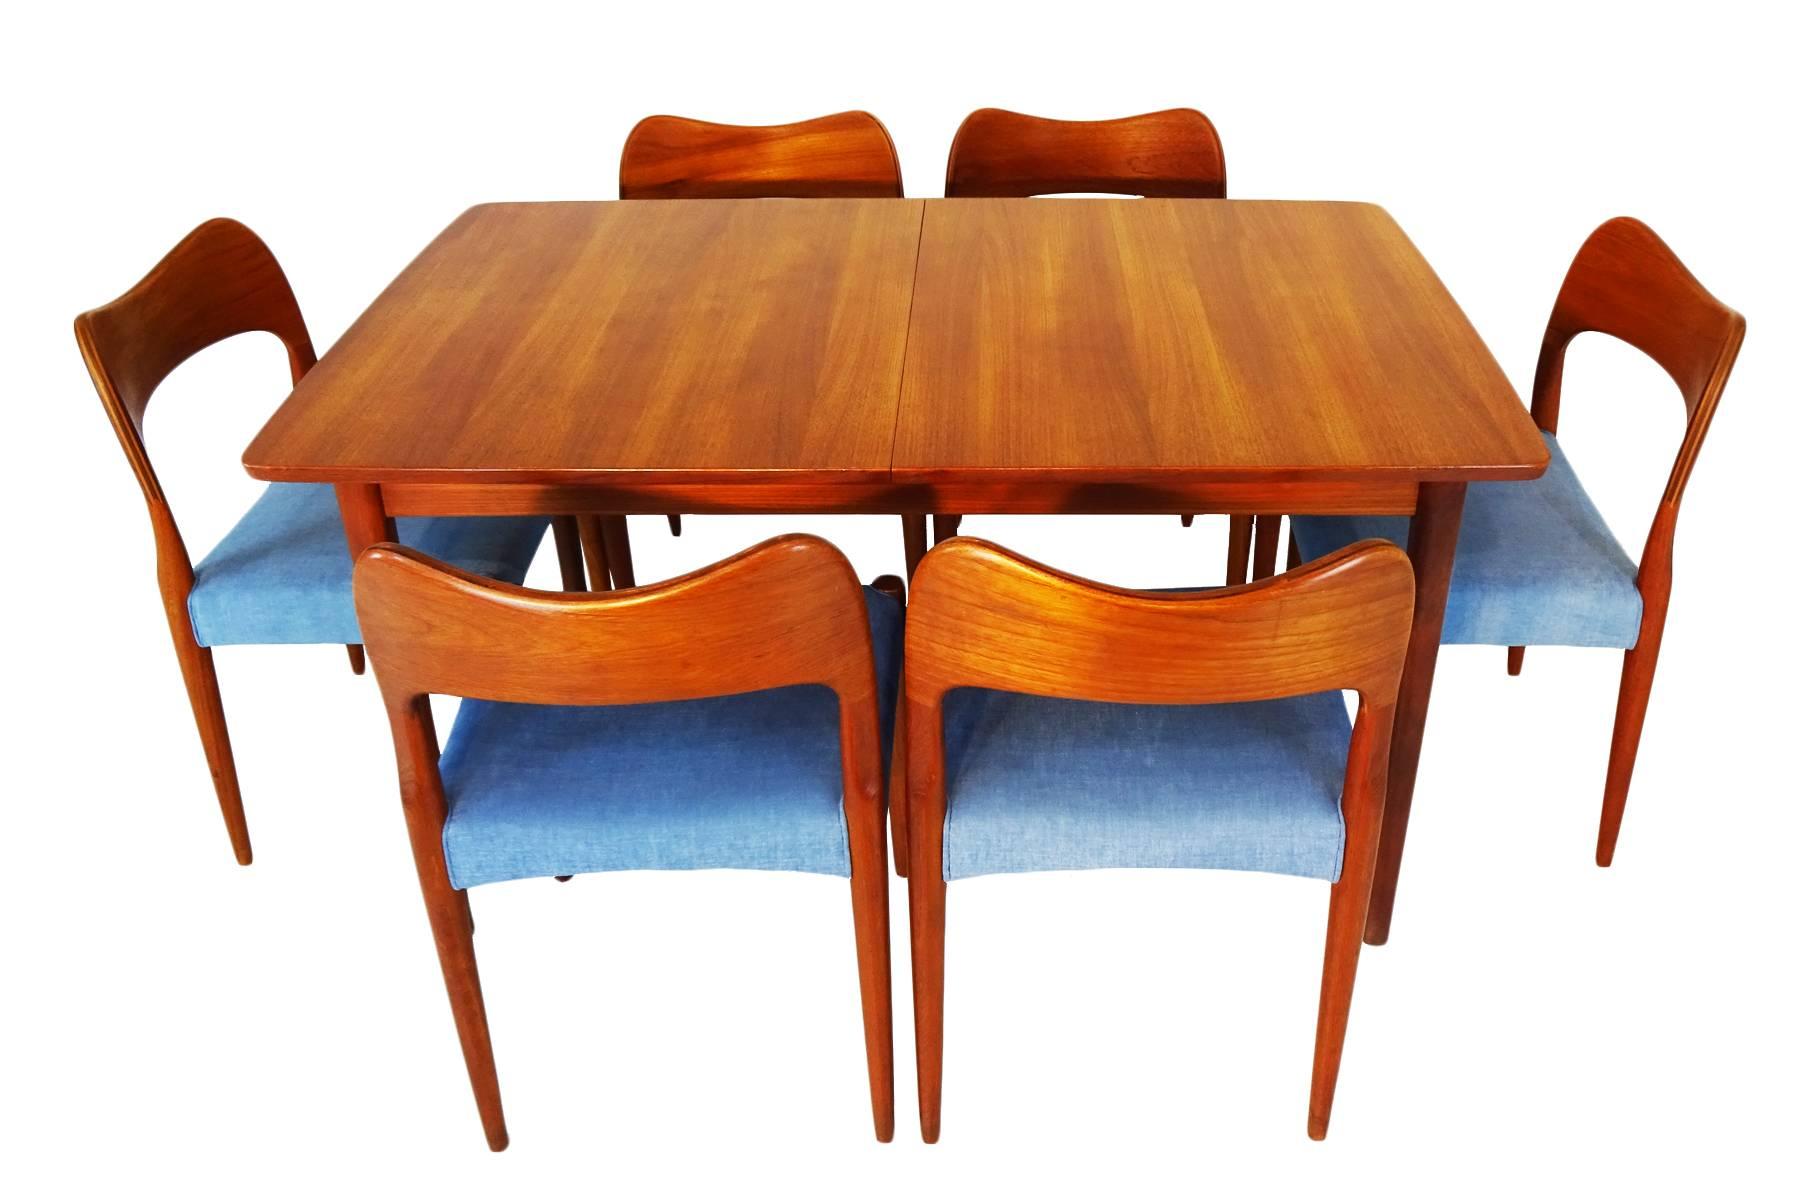 Set of six dining chairs and extending dining table with two leaves. The chairs were designed by Arne Hovmand Olsen and manufactured by Mogens Kold, Denmark, circa 1960 and the table by Nils Jonsson manufactured in Sweden also circa 1960 and